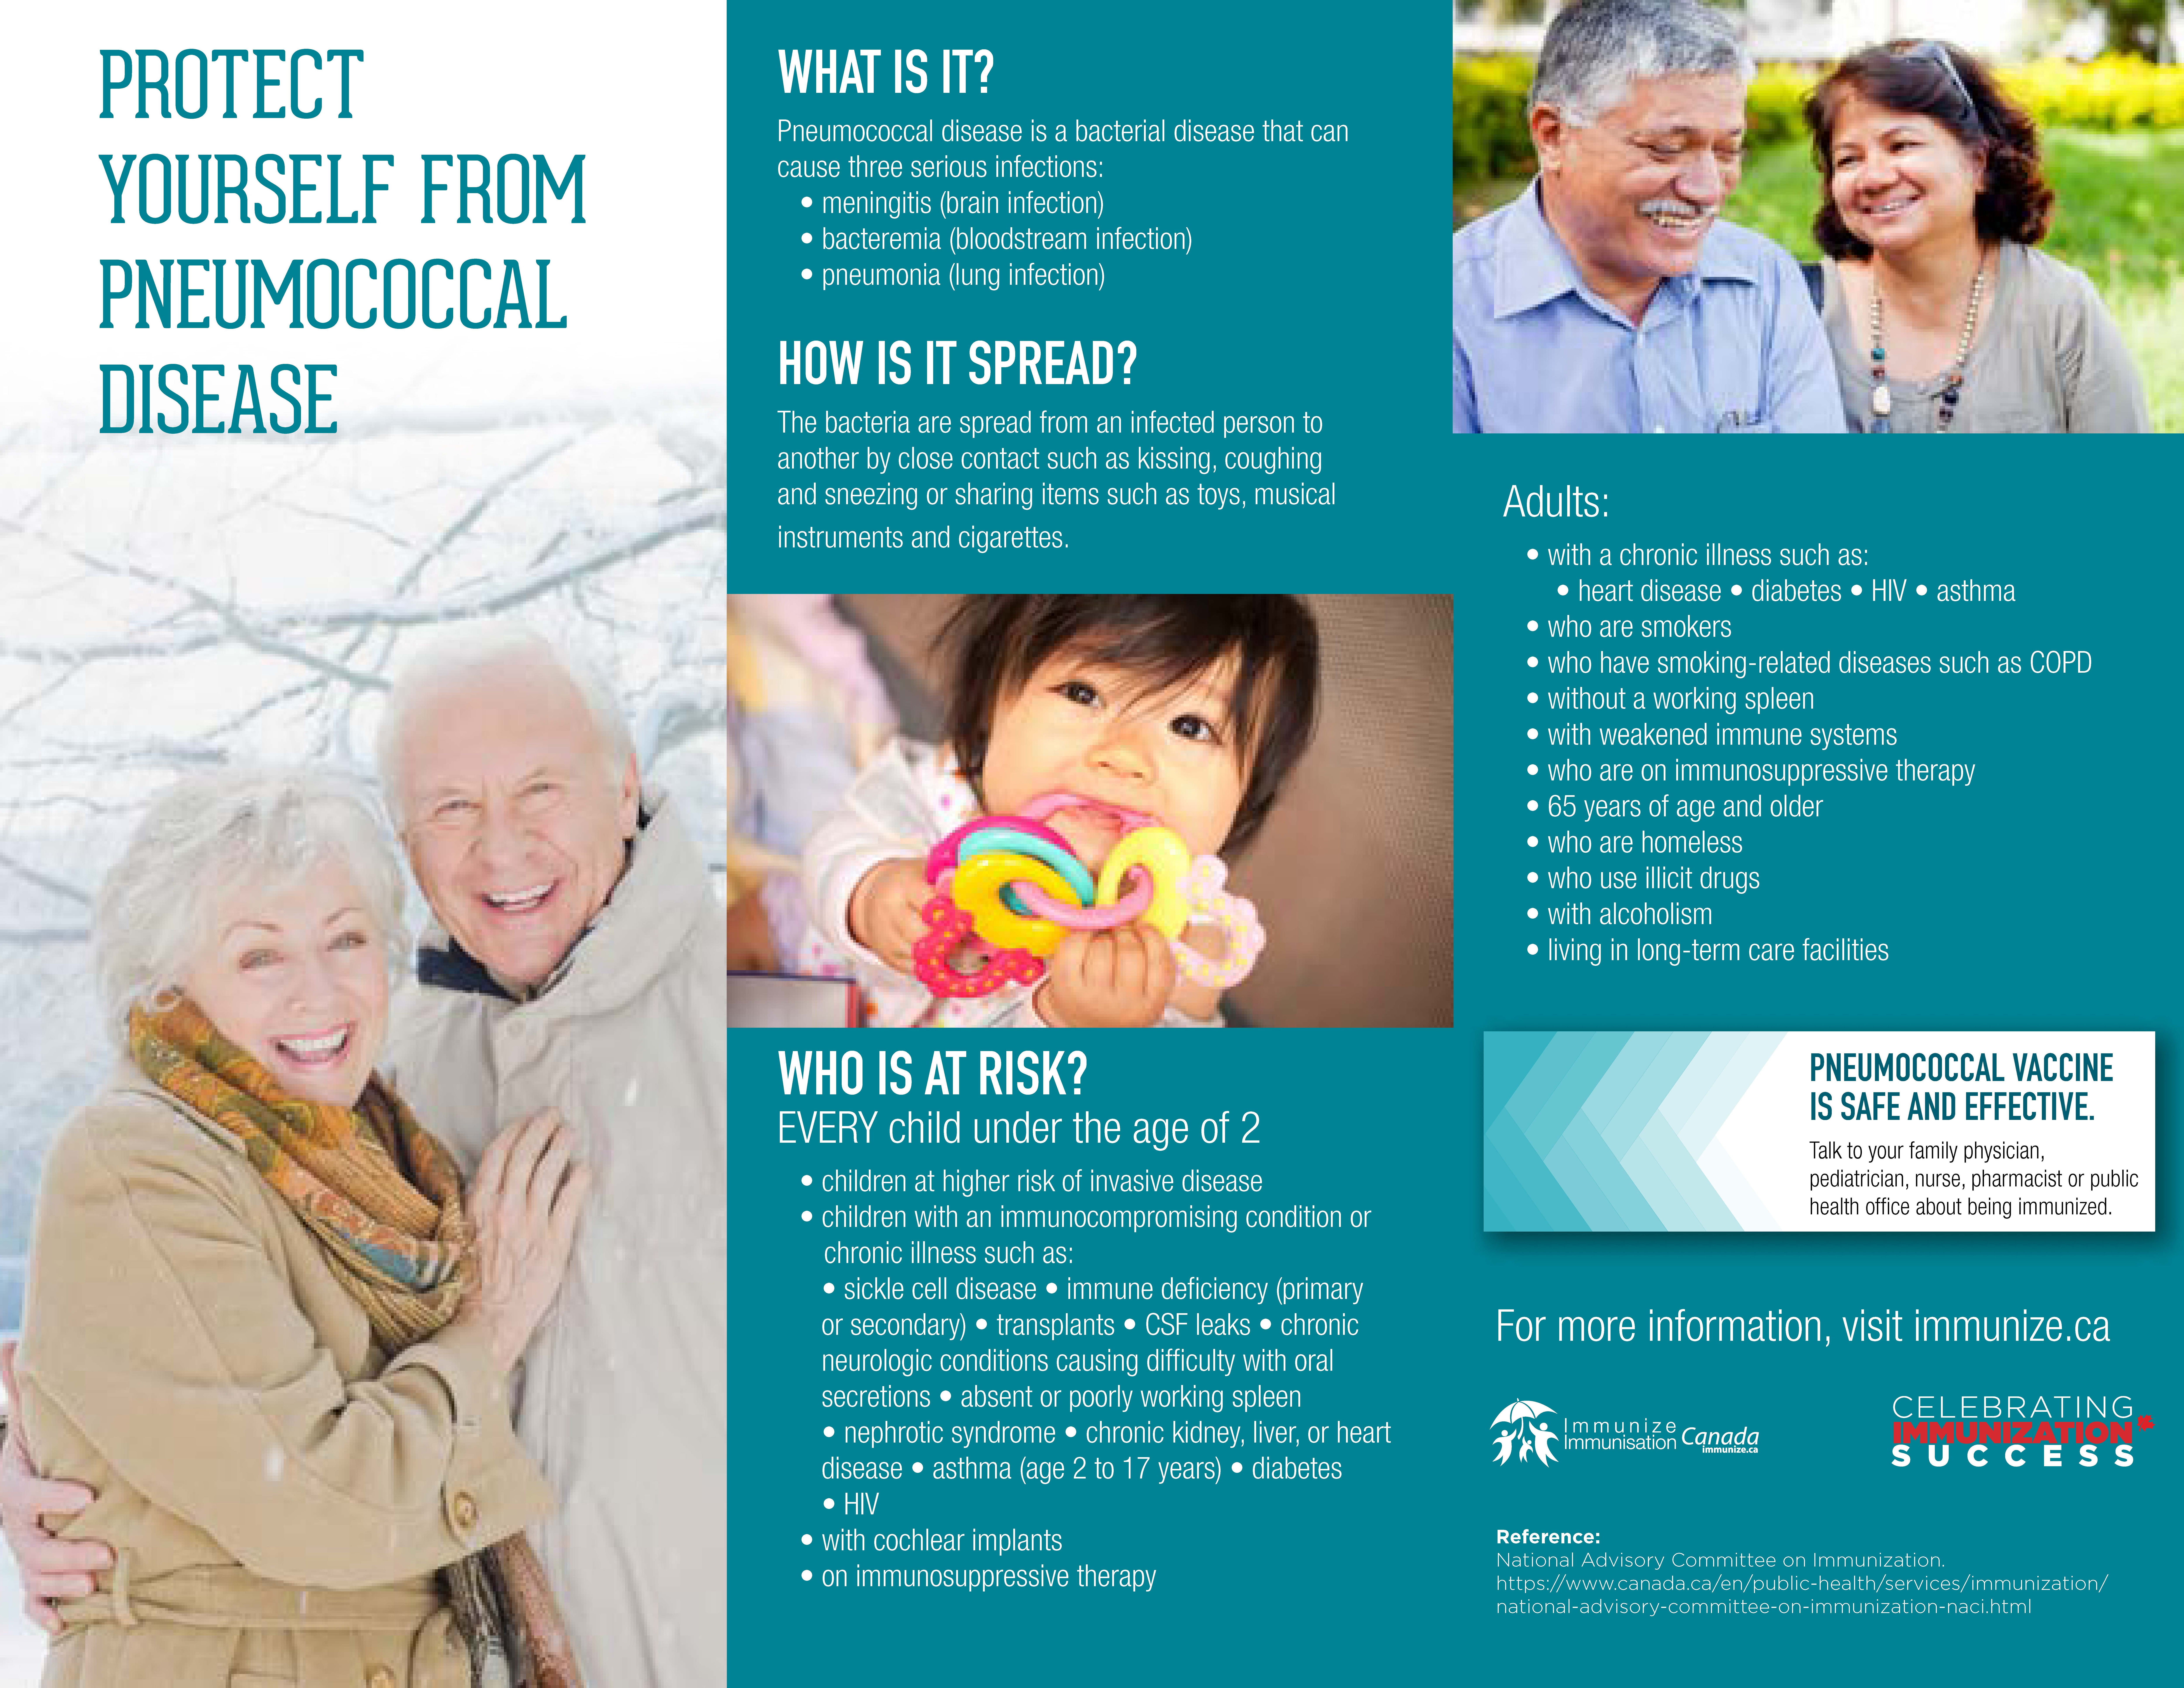 Protect yourself from pneumococcal disease (brochure)